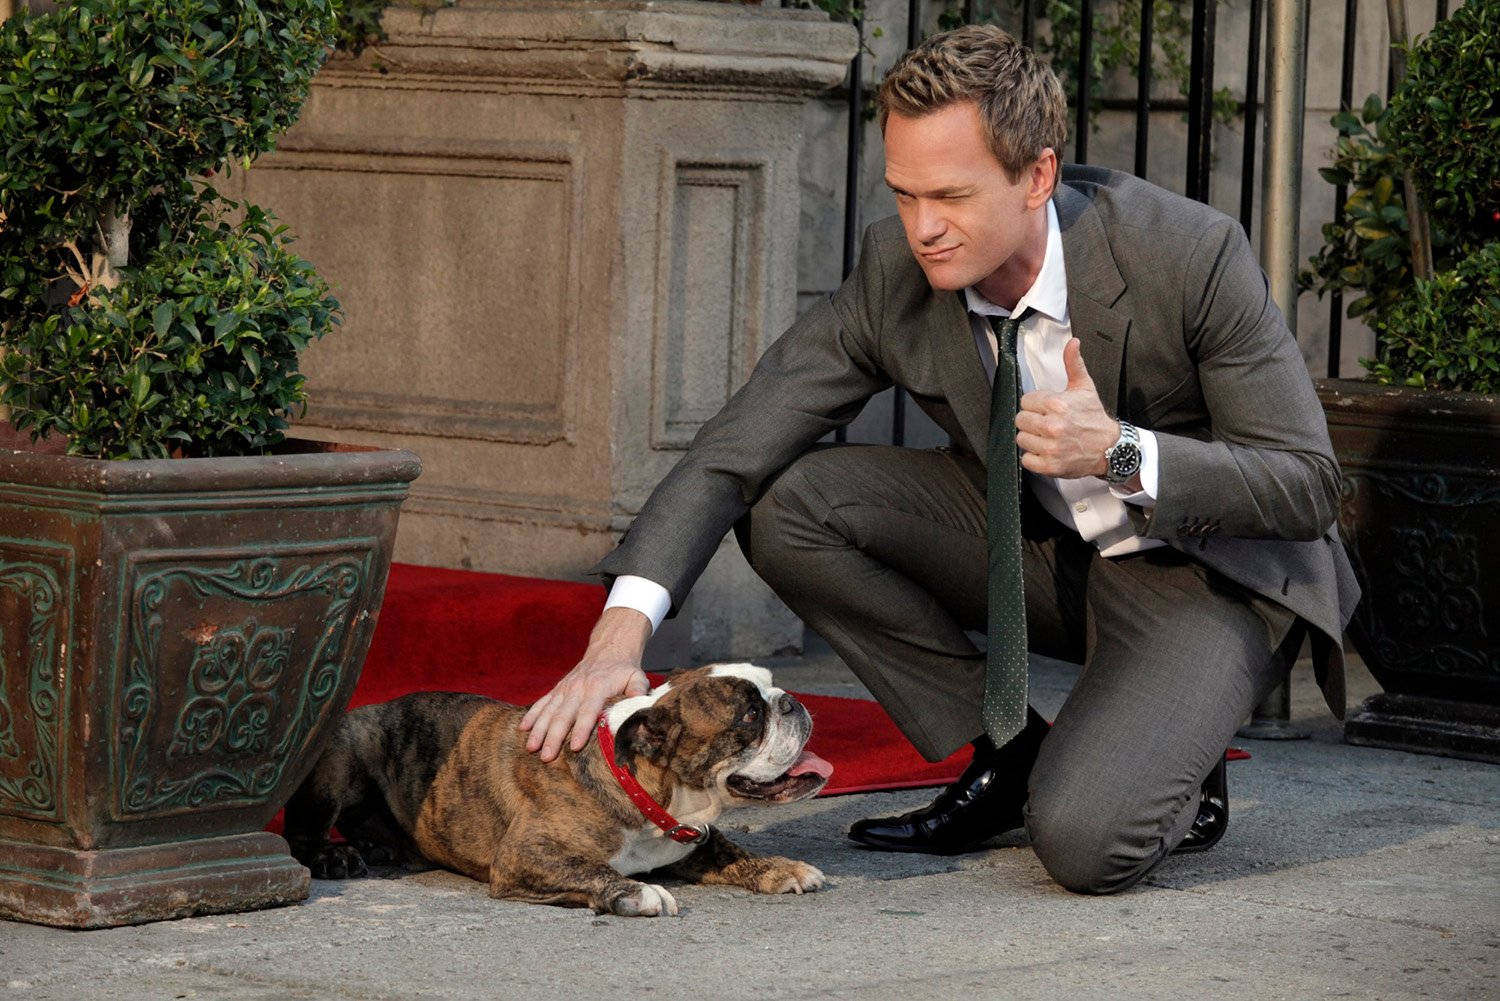 Neil Patrick Harris as Barney Stinson petting a dog and winking at the camera in 'How I Met Your Mother'